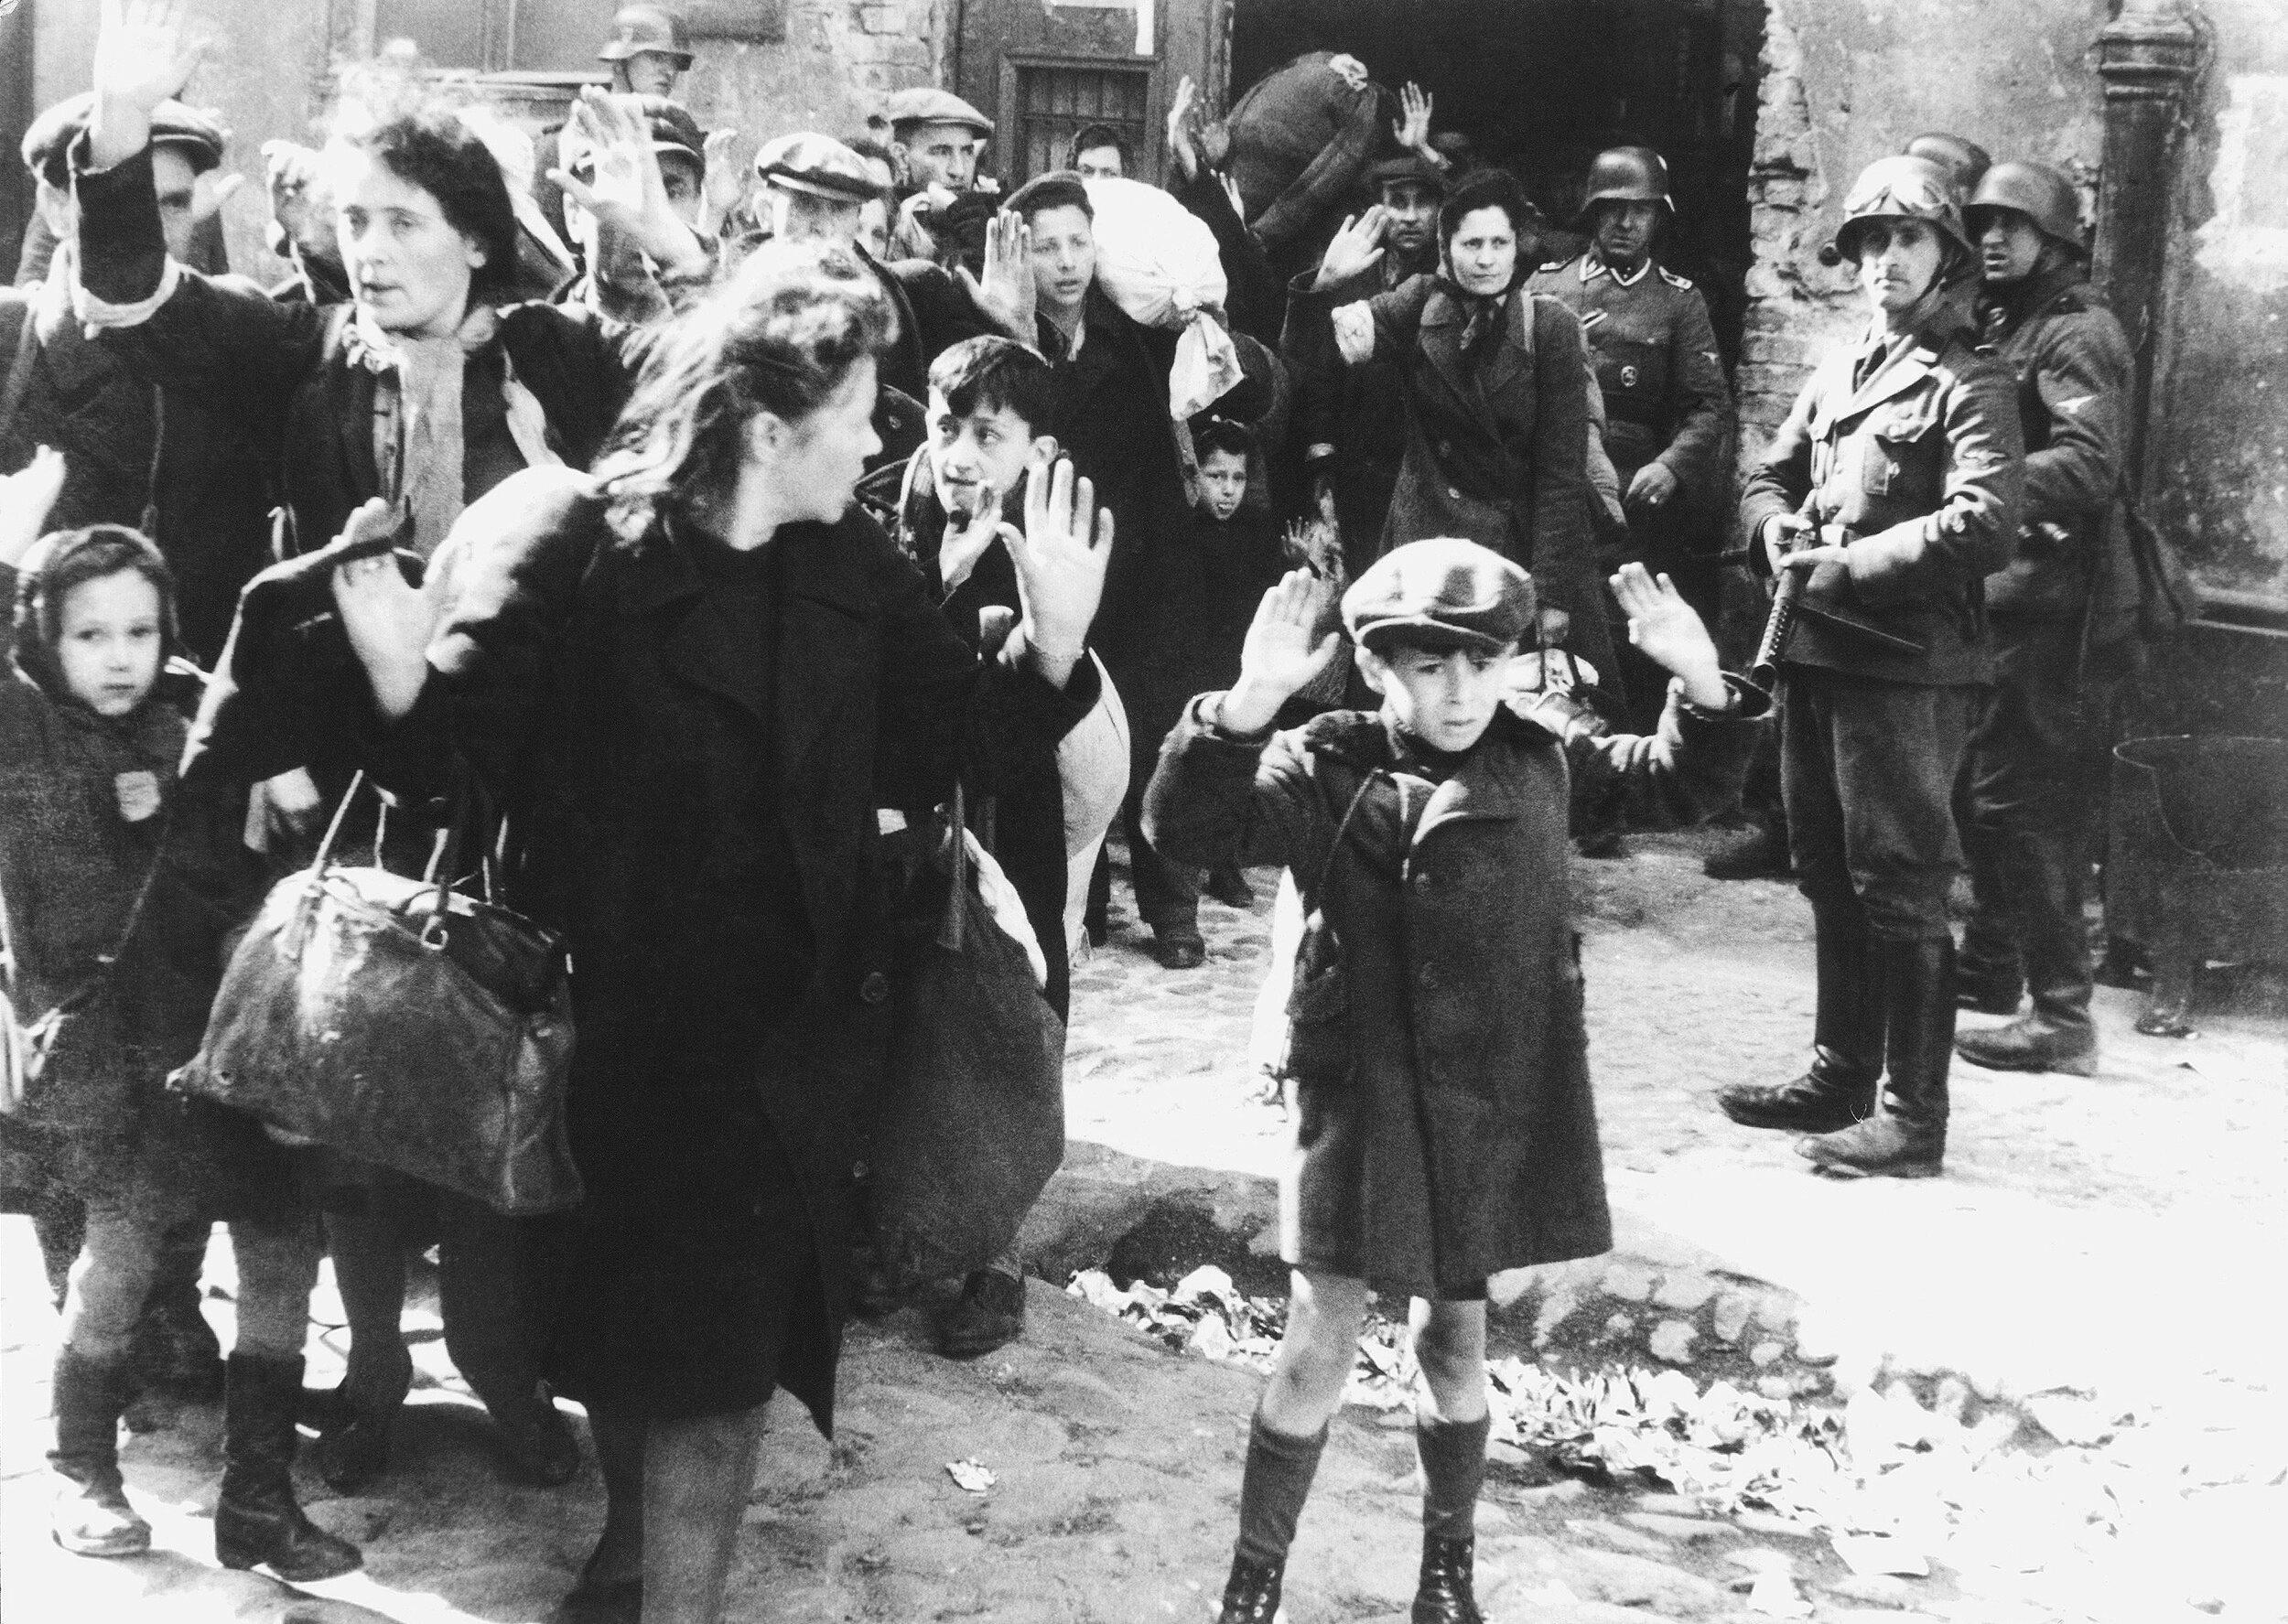 Jewish women and children forcibly removed from a bunker in Warsaw